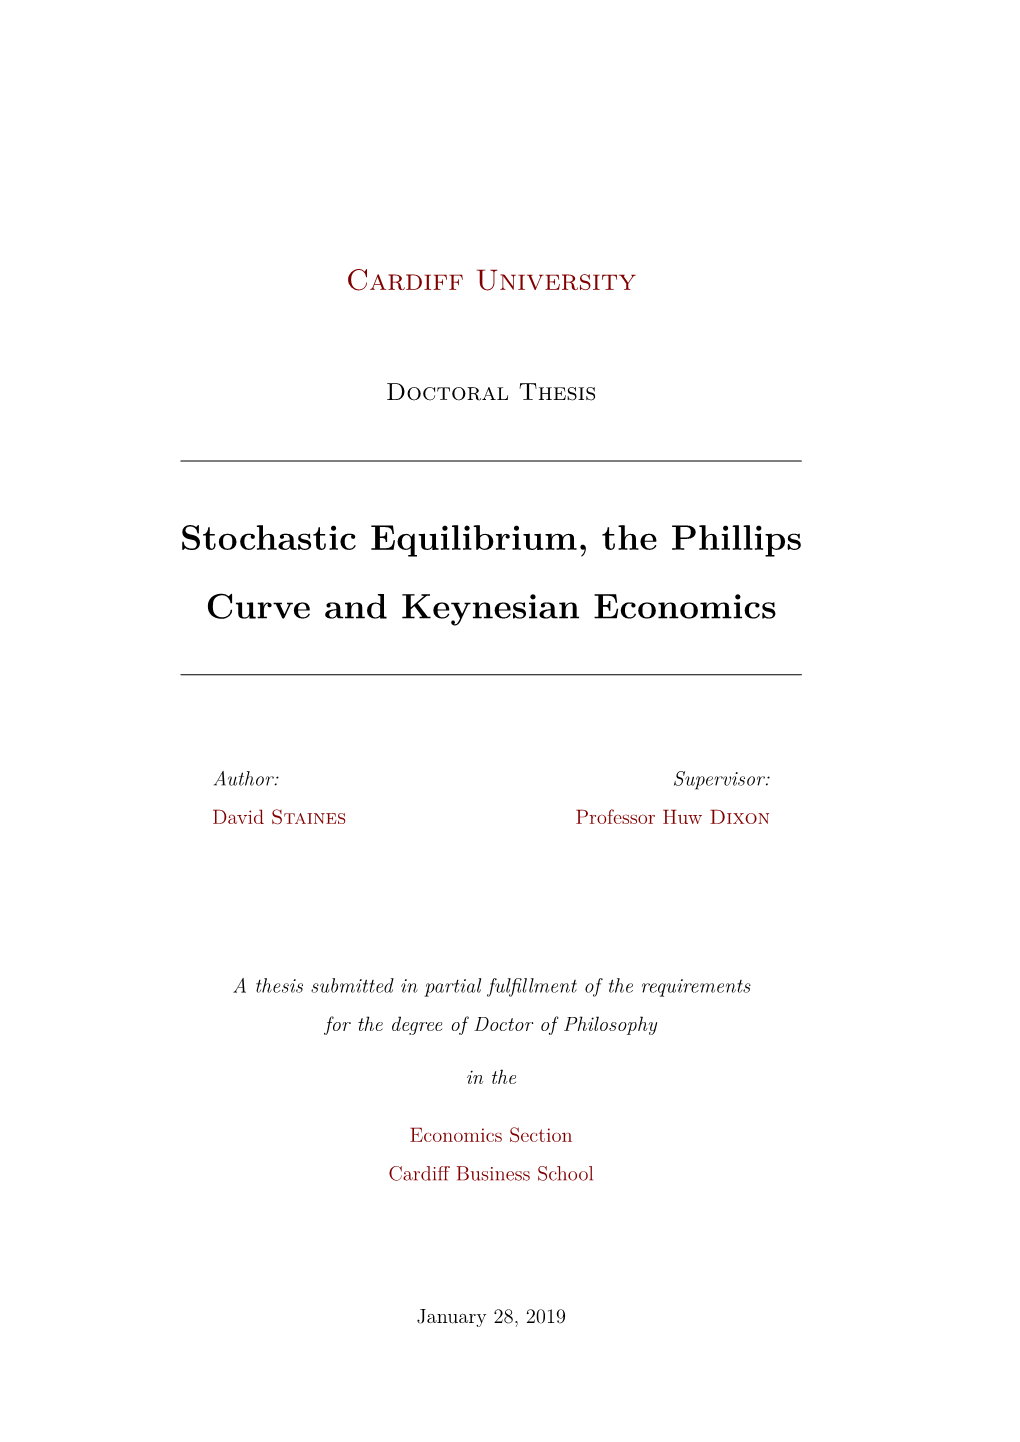 Stochastic Equilibrium, the Phillips Curve and Keynesian Economics